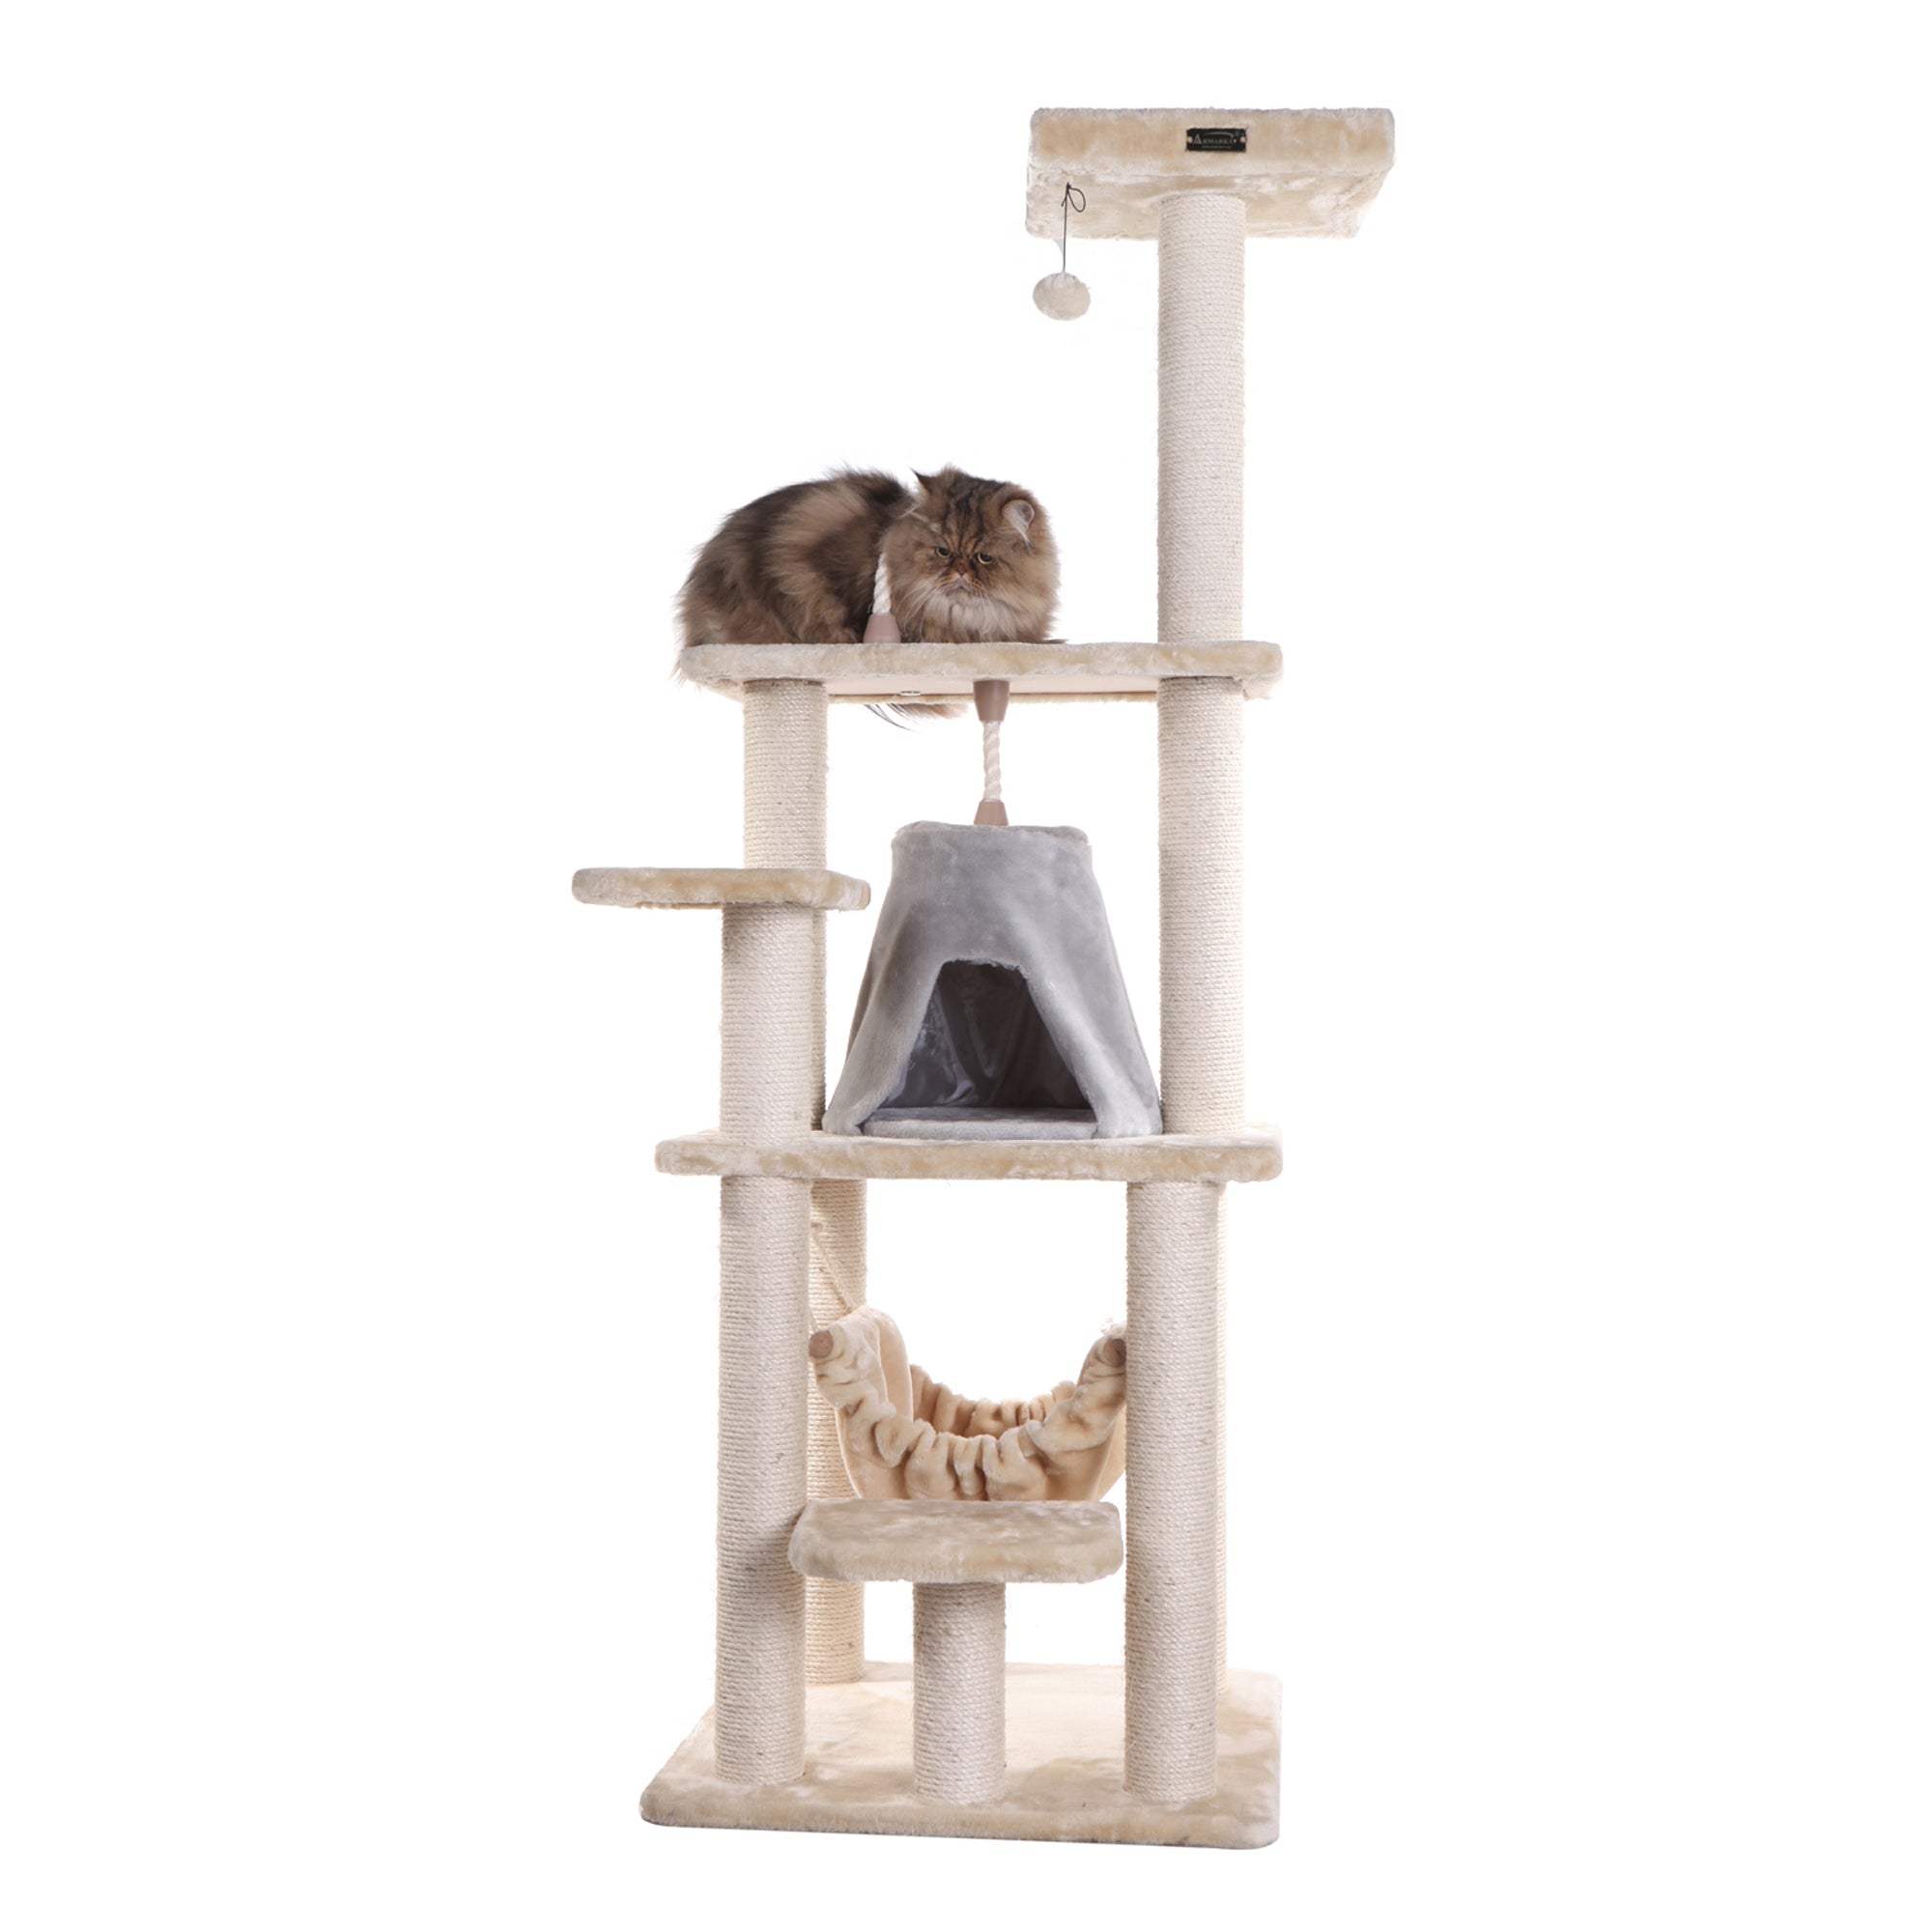 65-inch Faux Fur Cat Tree, Beige with Hammock and Tent by Armarkat